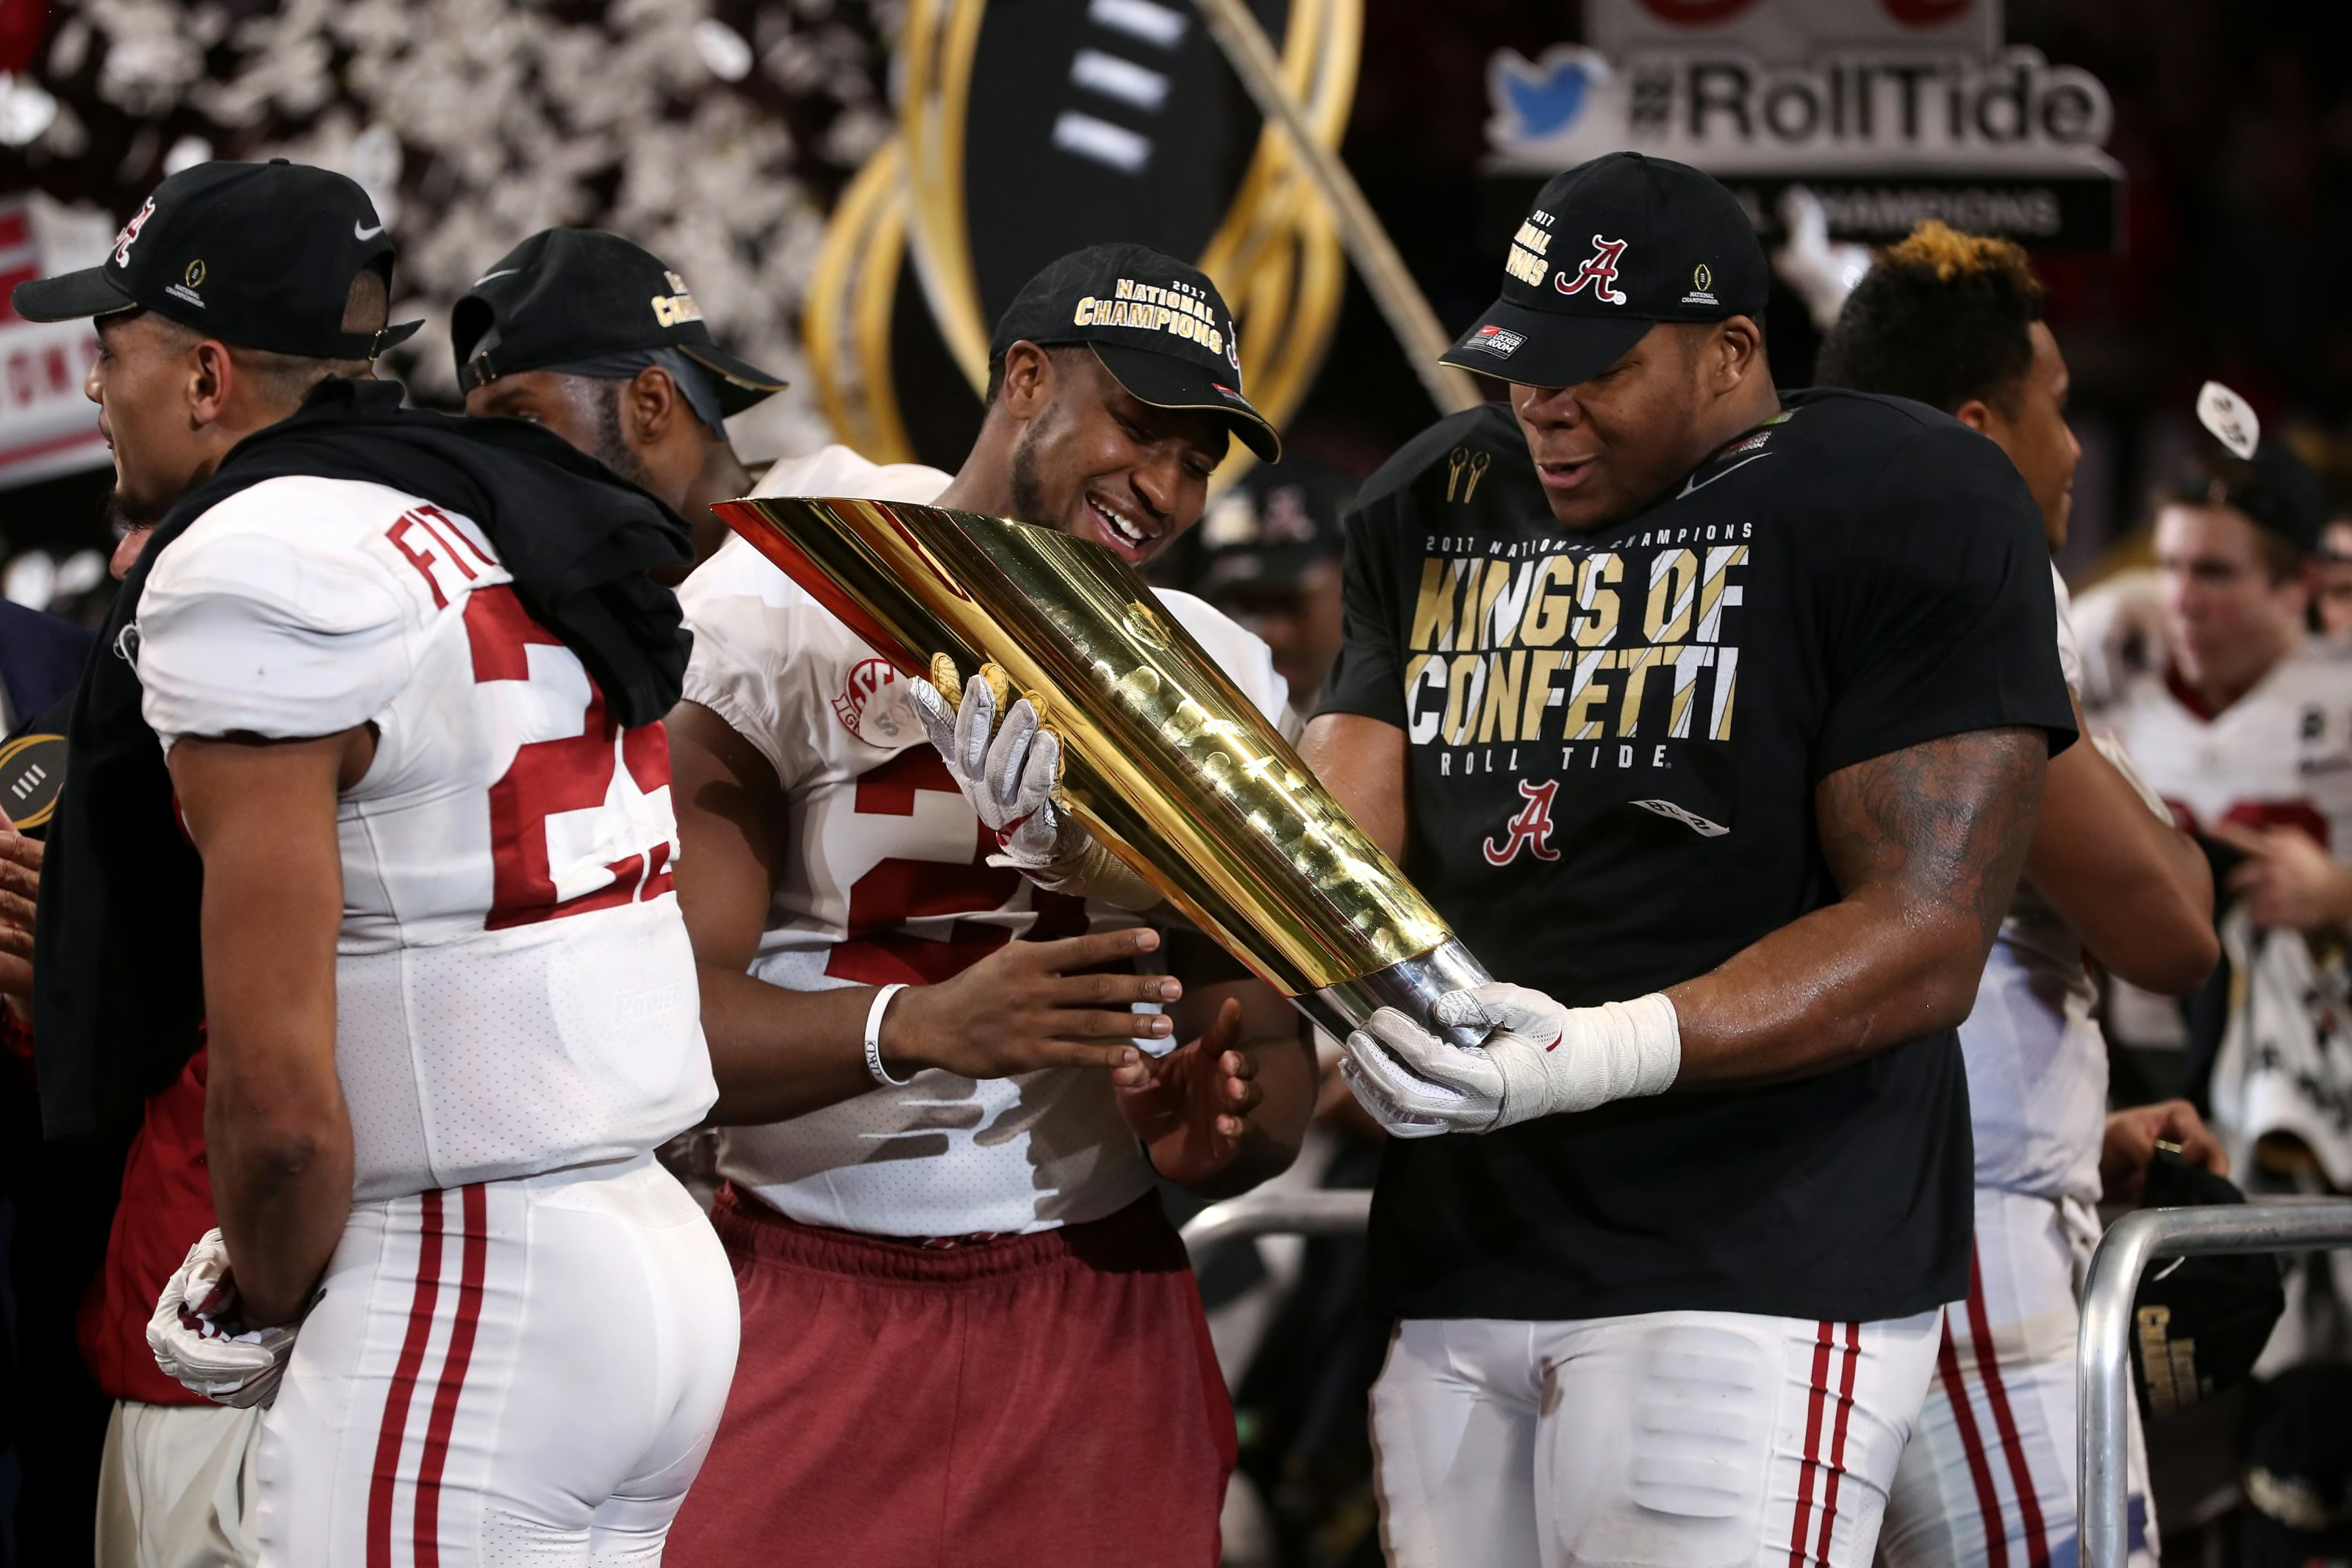 When is the 2018-19 College Football Playoff?